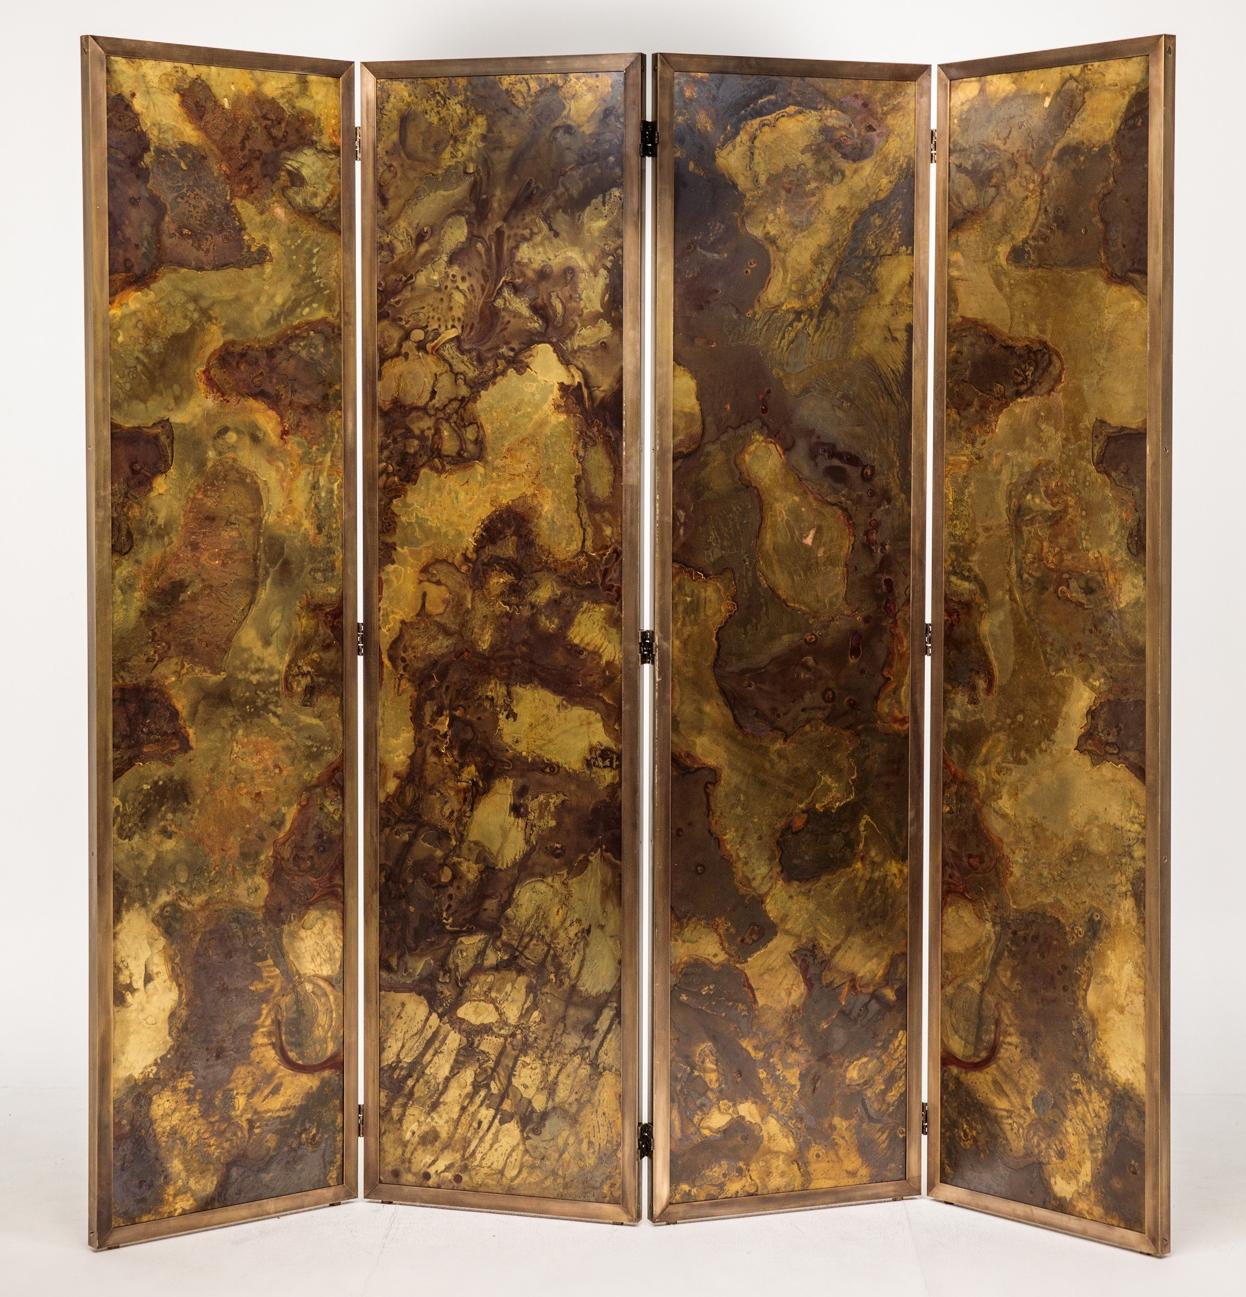 Exceptional pair of large four-leaf screens, France, circa 1980.
The frames are in patinated brass, with oxidized brass panels on one side and a mirror on the other.

Each screen weighs approximately 80 kg.
 